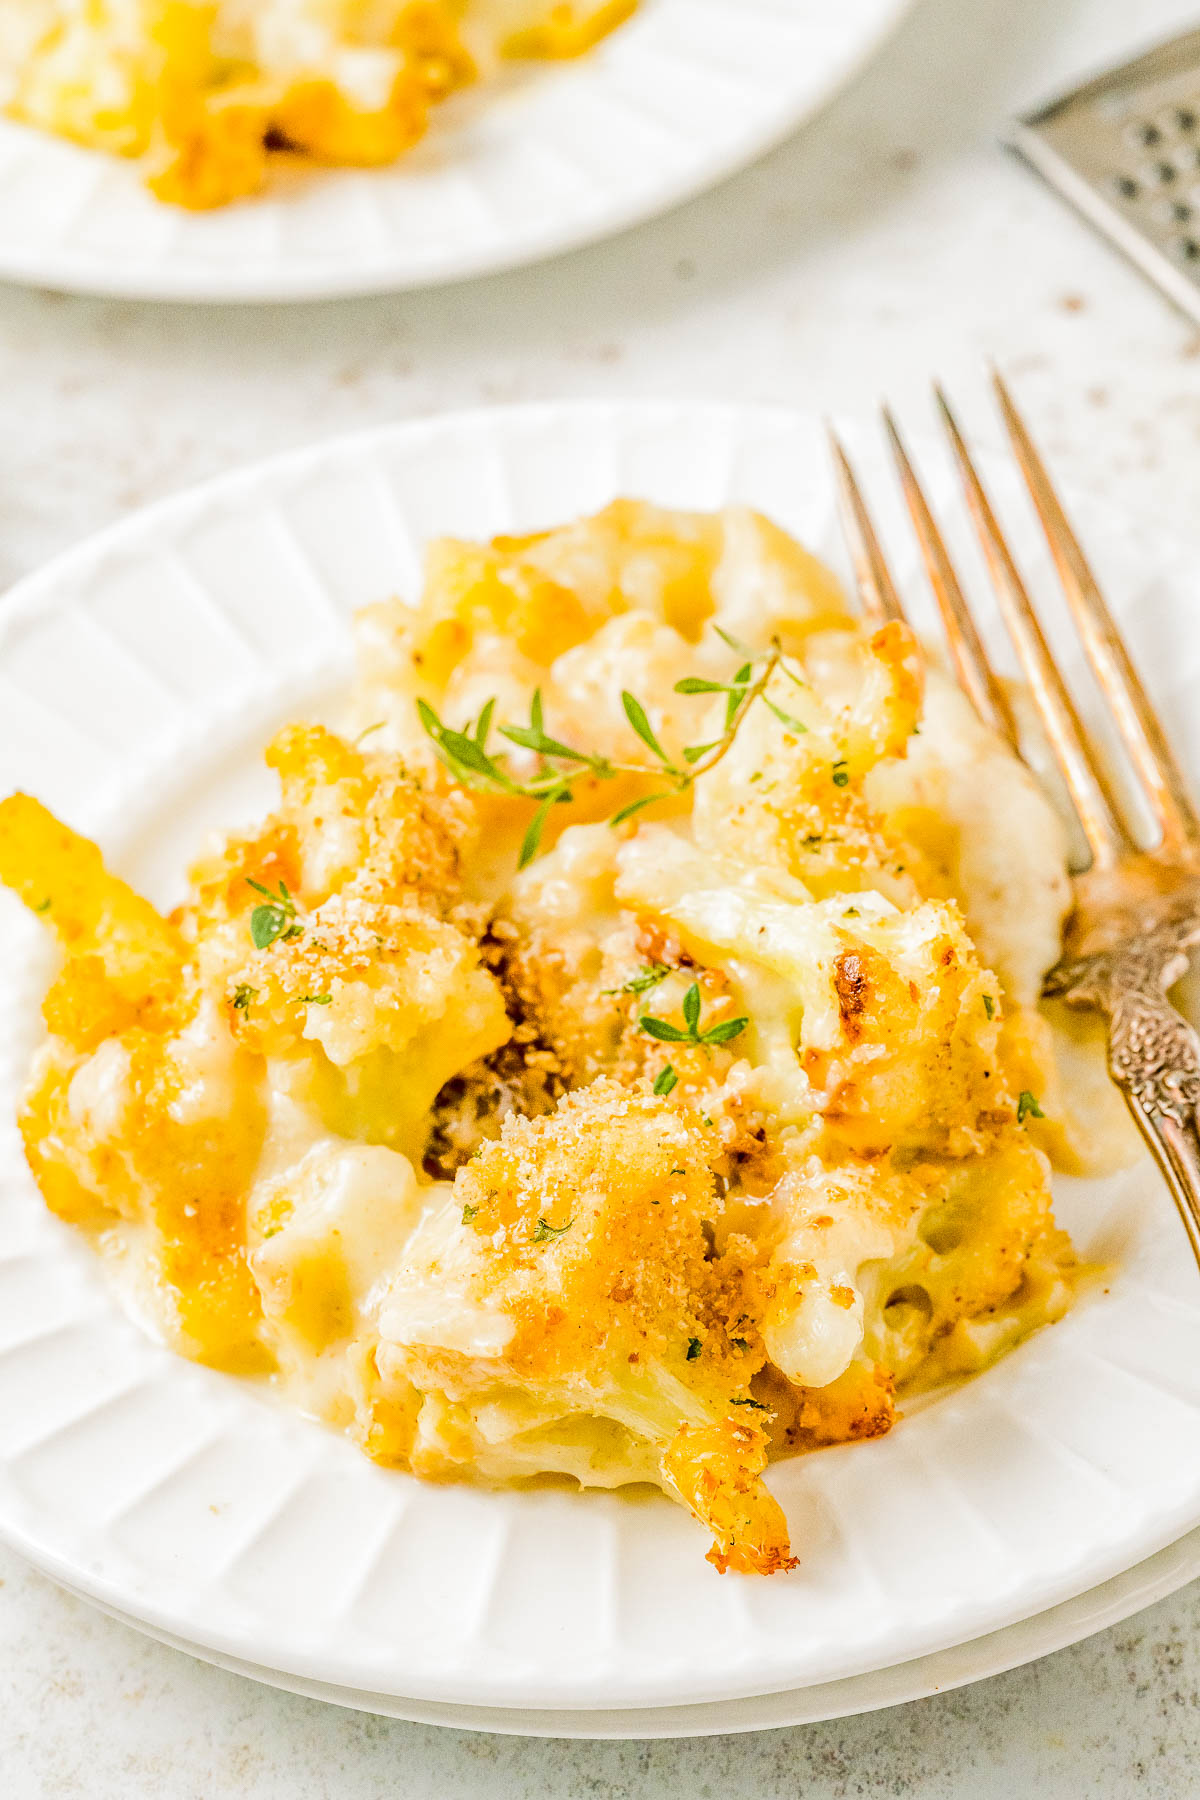 Cheesy Cauliflower Gratin — Cauliflower florets are coated in a creamy cheese sauce and sprinkled with a crispy panko breadcrumb topping before being baked to golden, bubbly perfection! This is an EASY yet ELEGANT side dish that’s perfect for busy weeknights and holiday meals alike including Thanksgiving, Christmas, or New Year's Eve! 